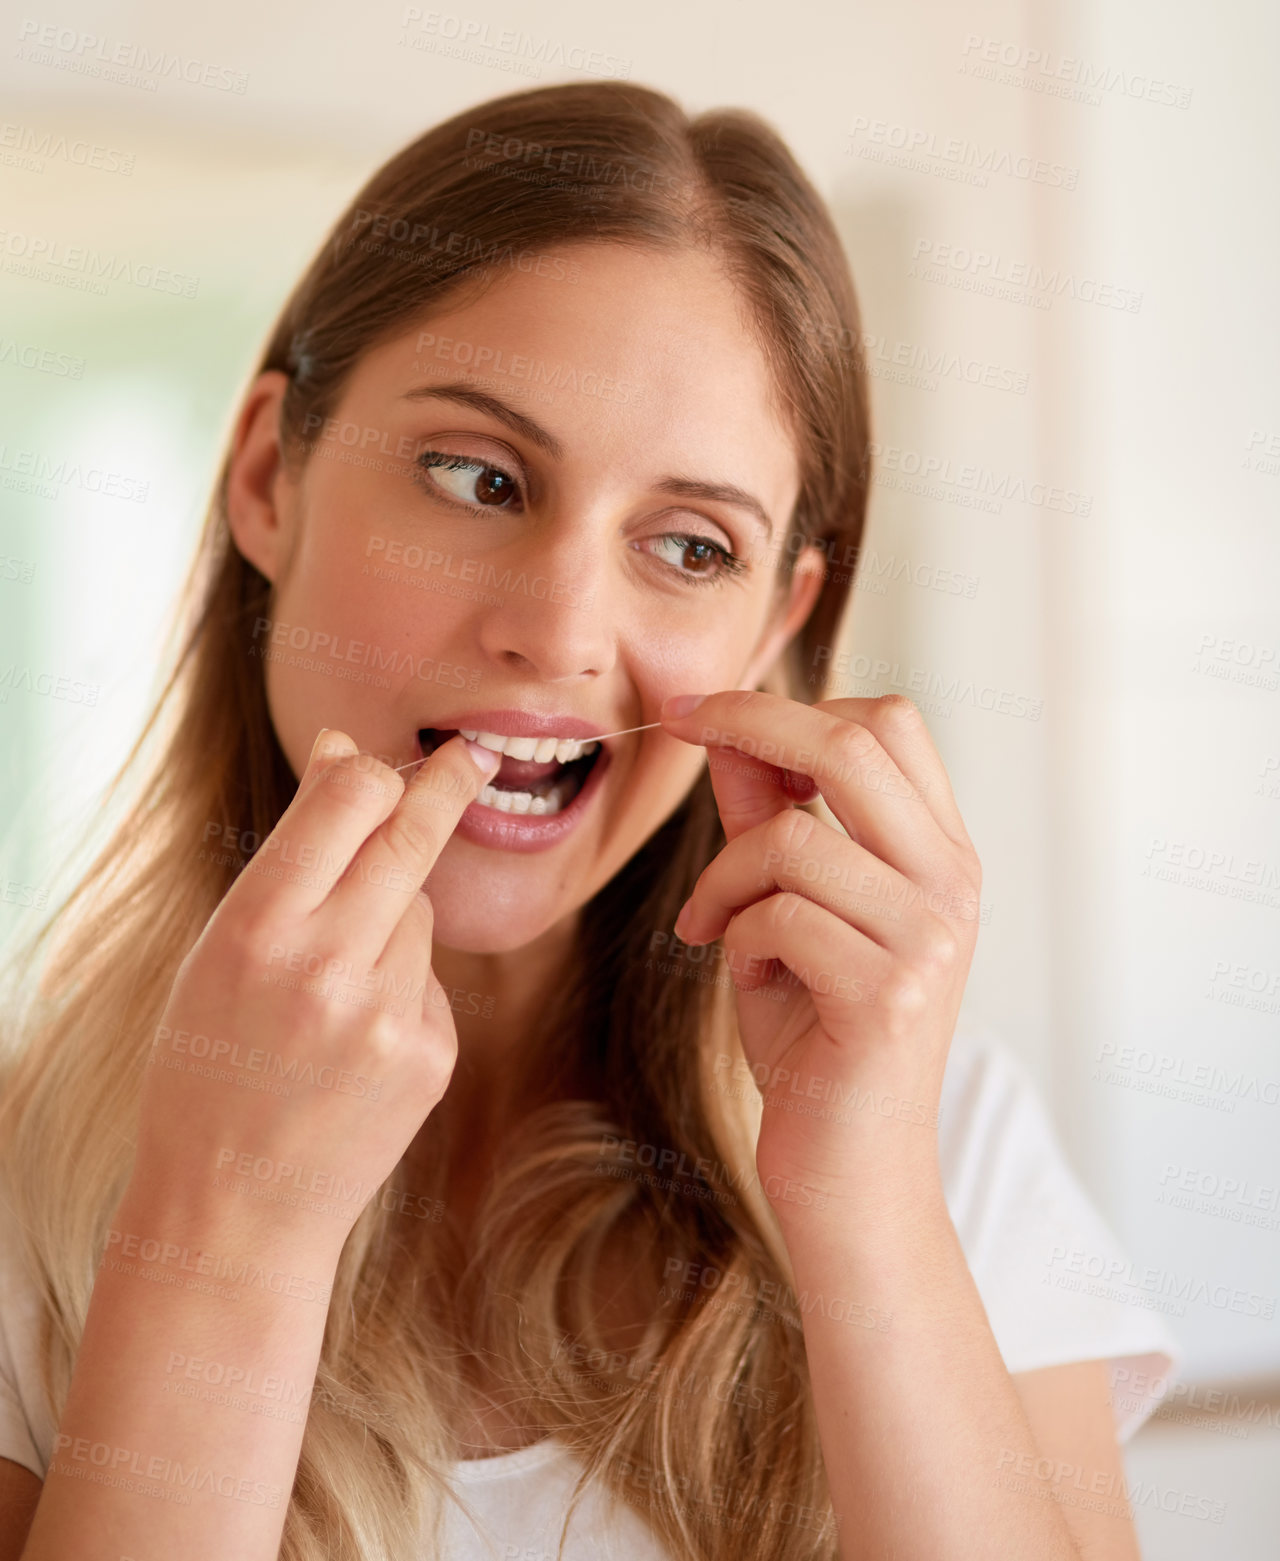 Buy stock photo Cropped shot of a young woman flossing her teeth at home